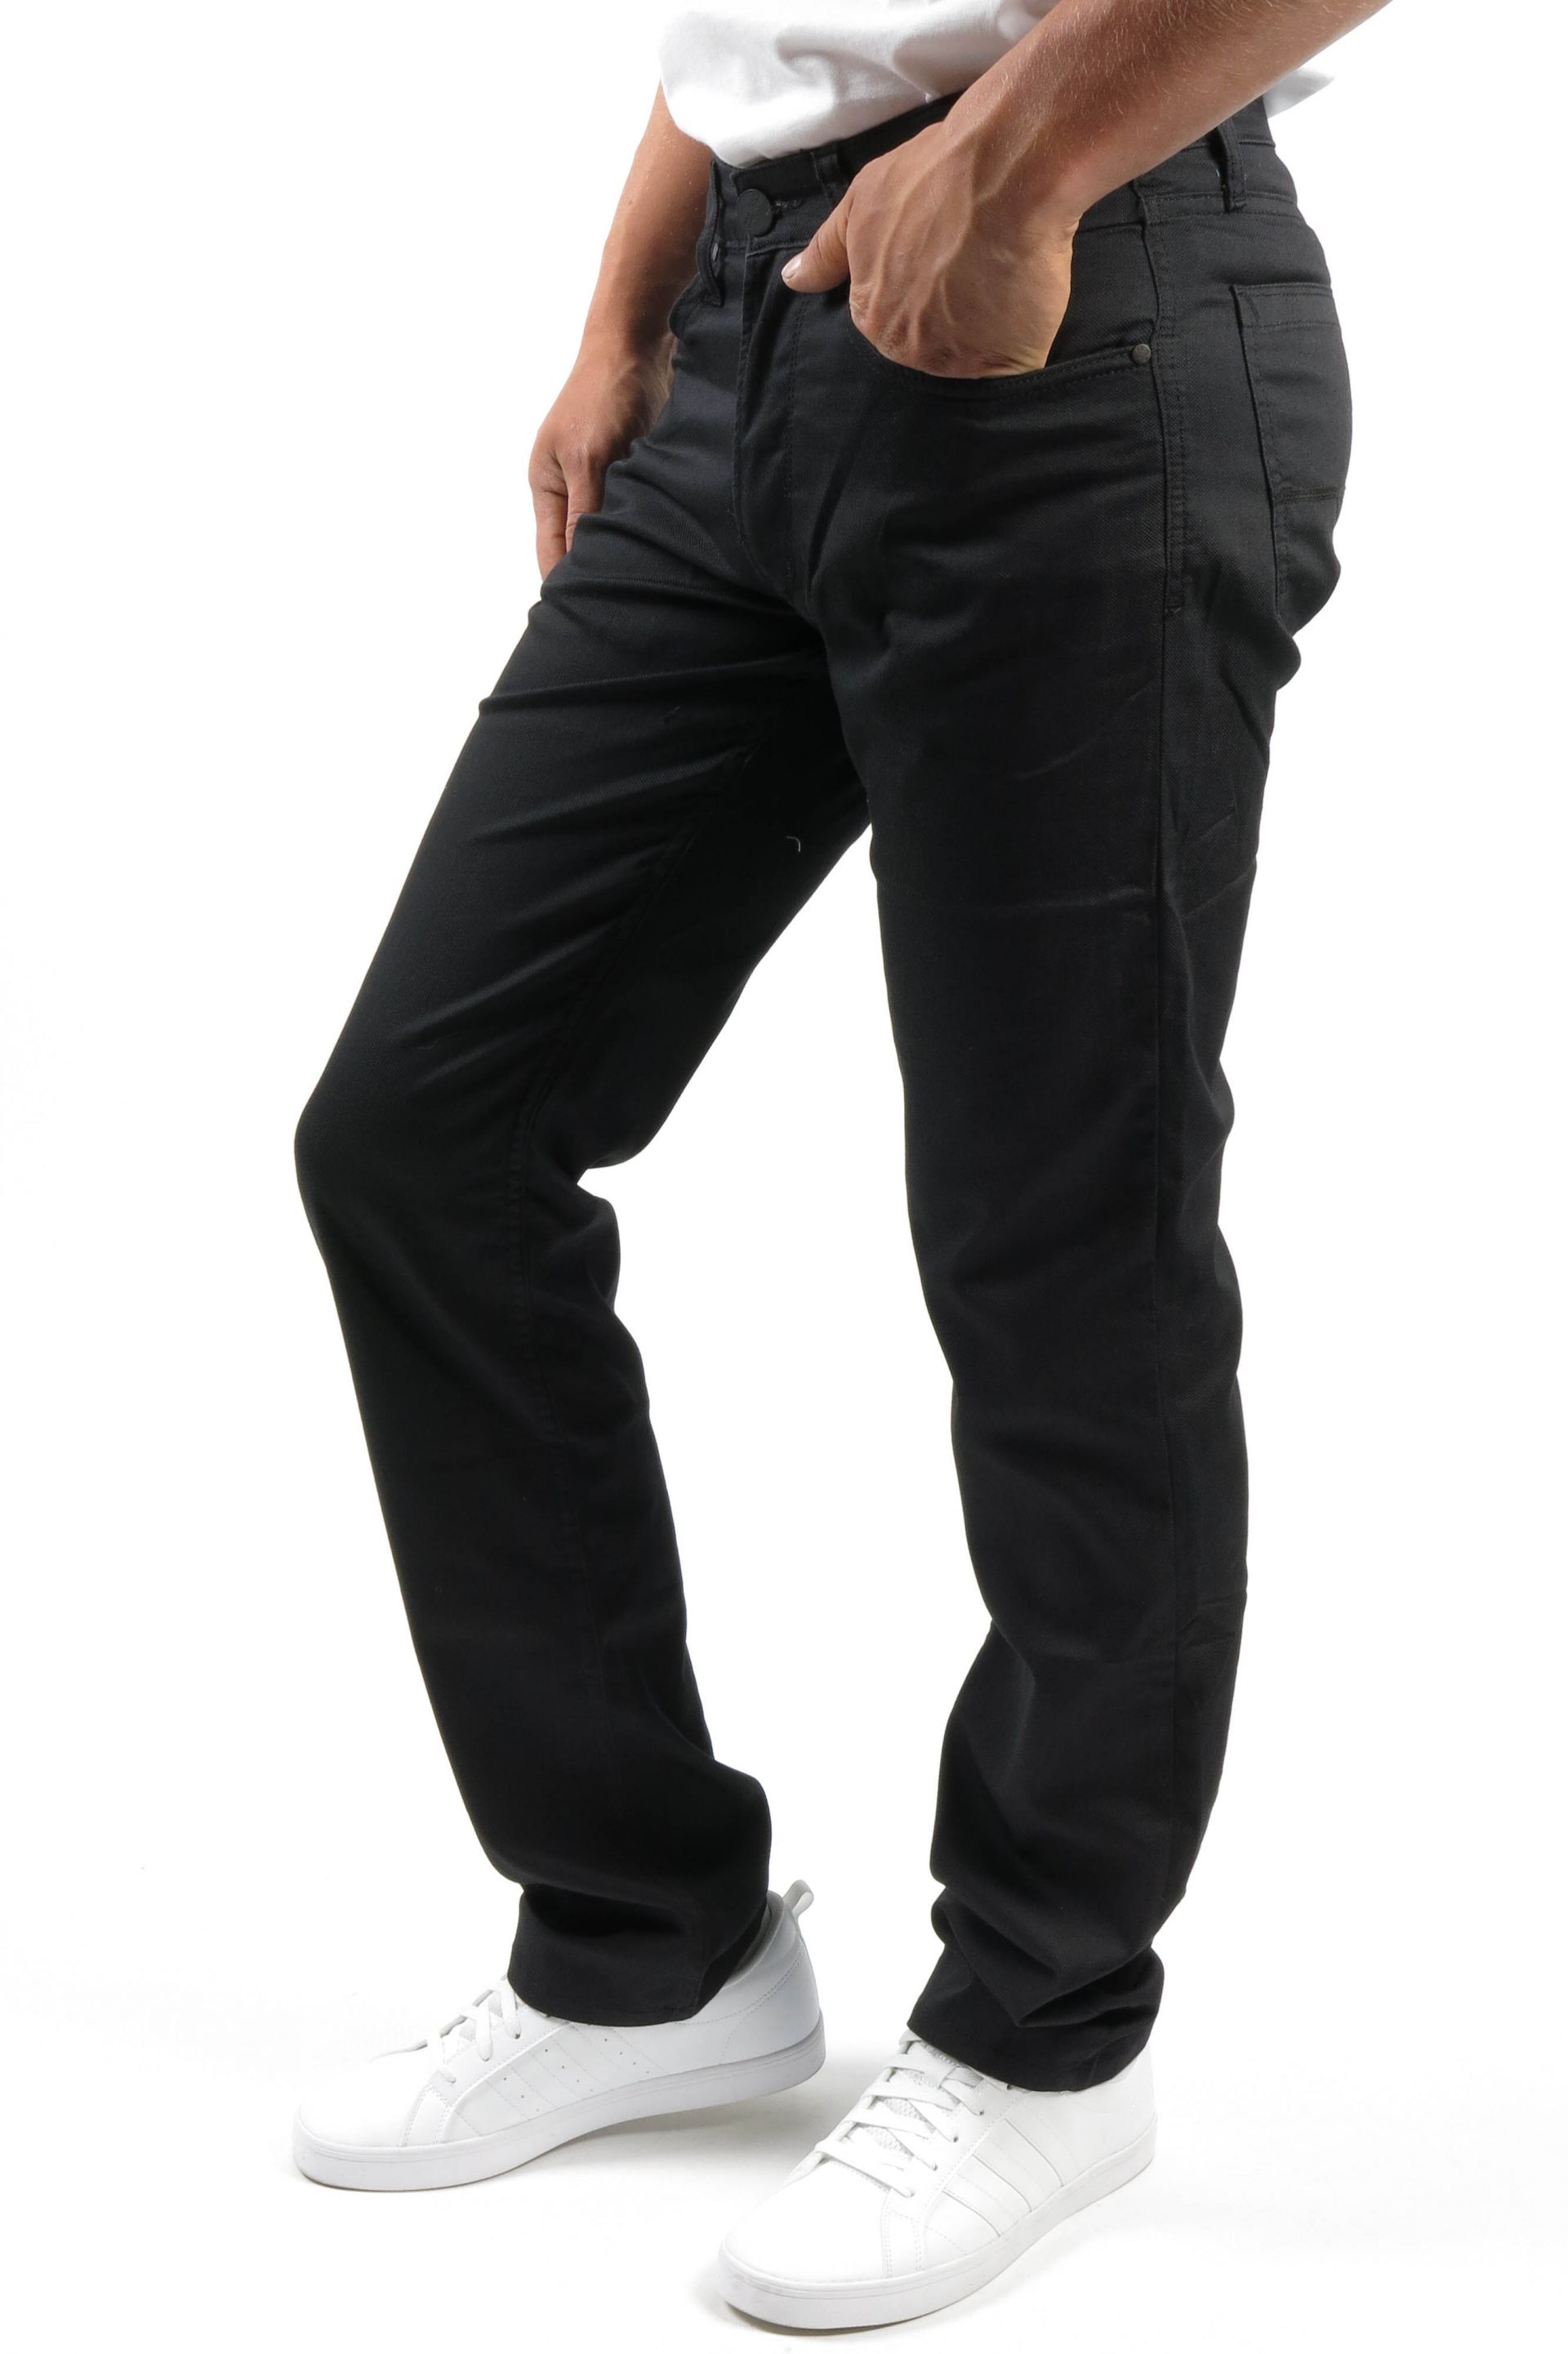 Chino pants BLK JEANS 8279-283-301-202